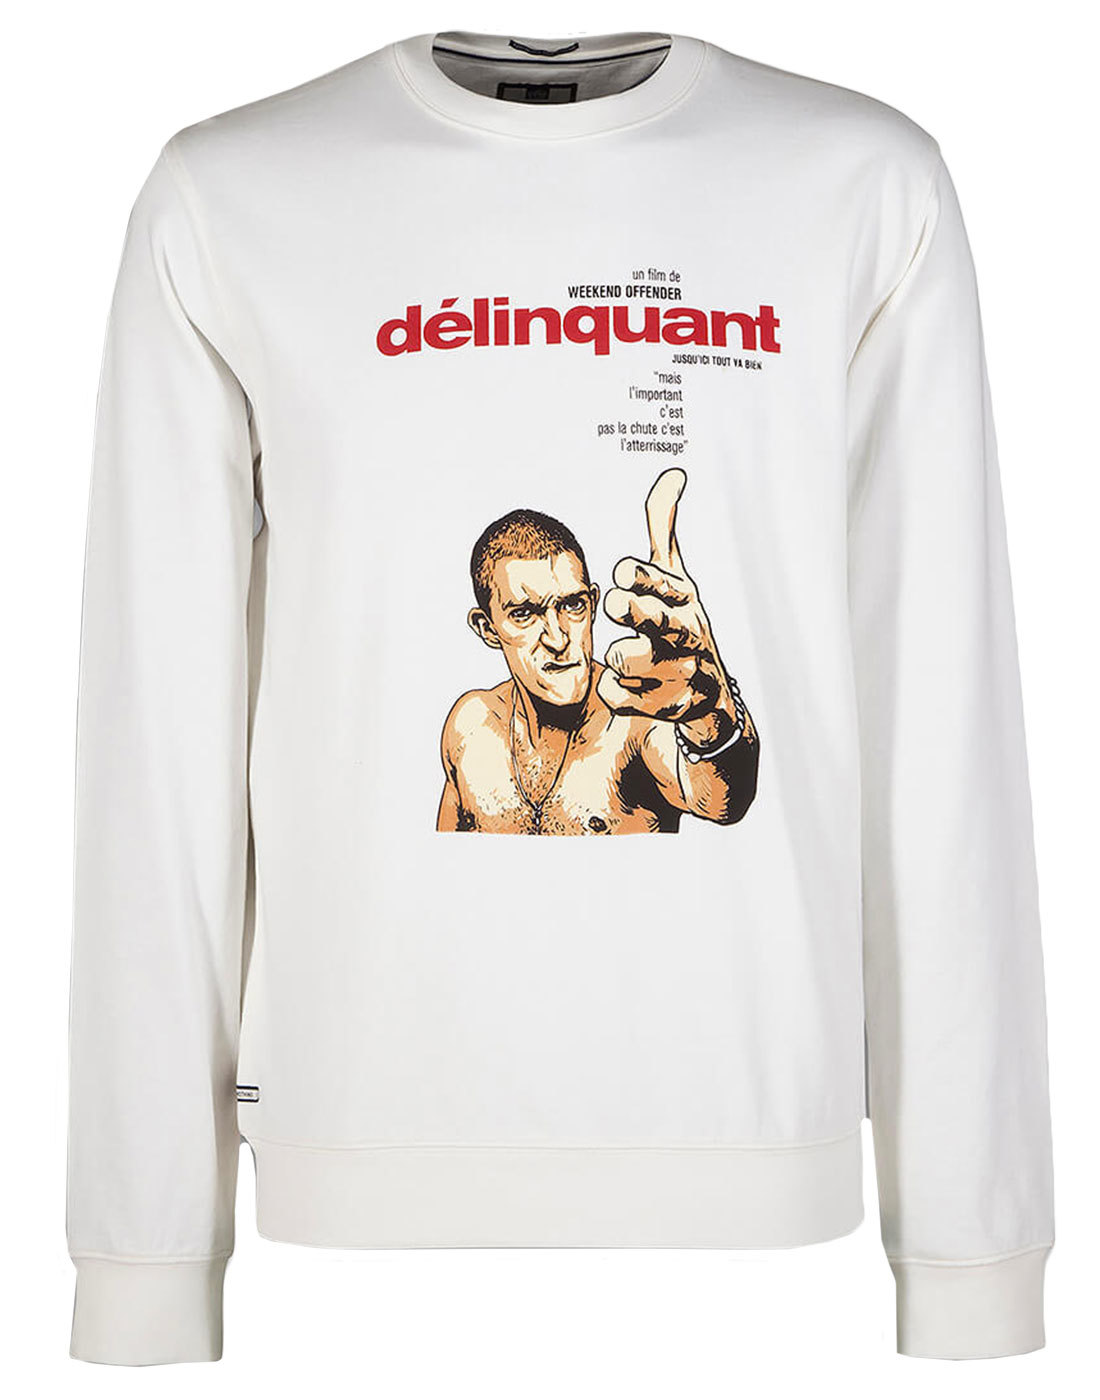 Delinquant WEEKEND OFFENDER La Haine Casuals Sweat